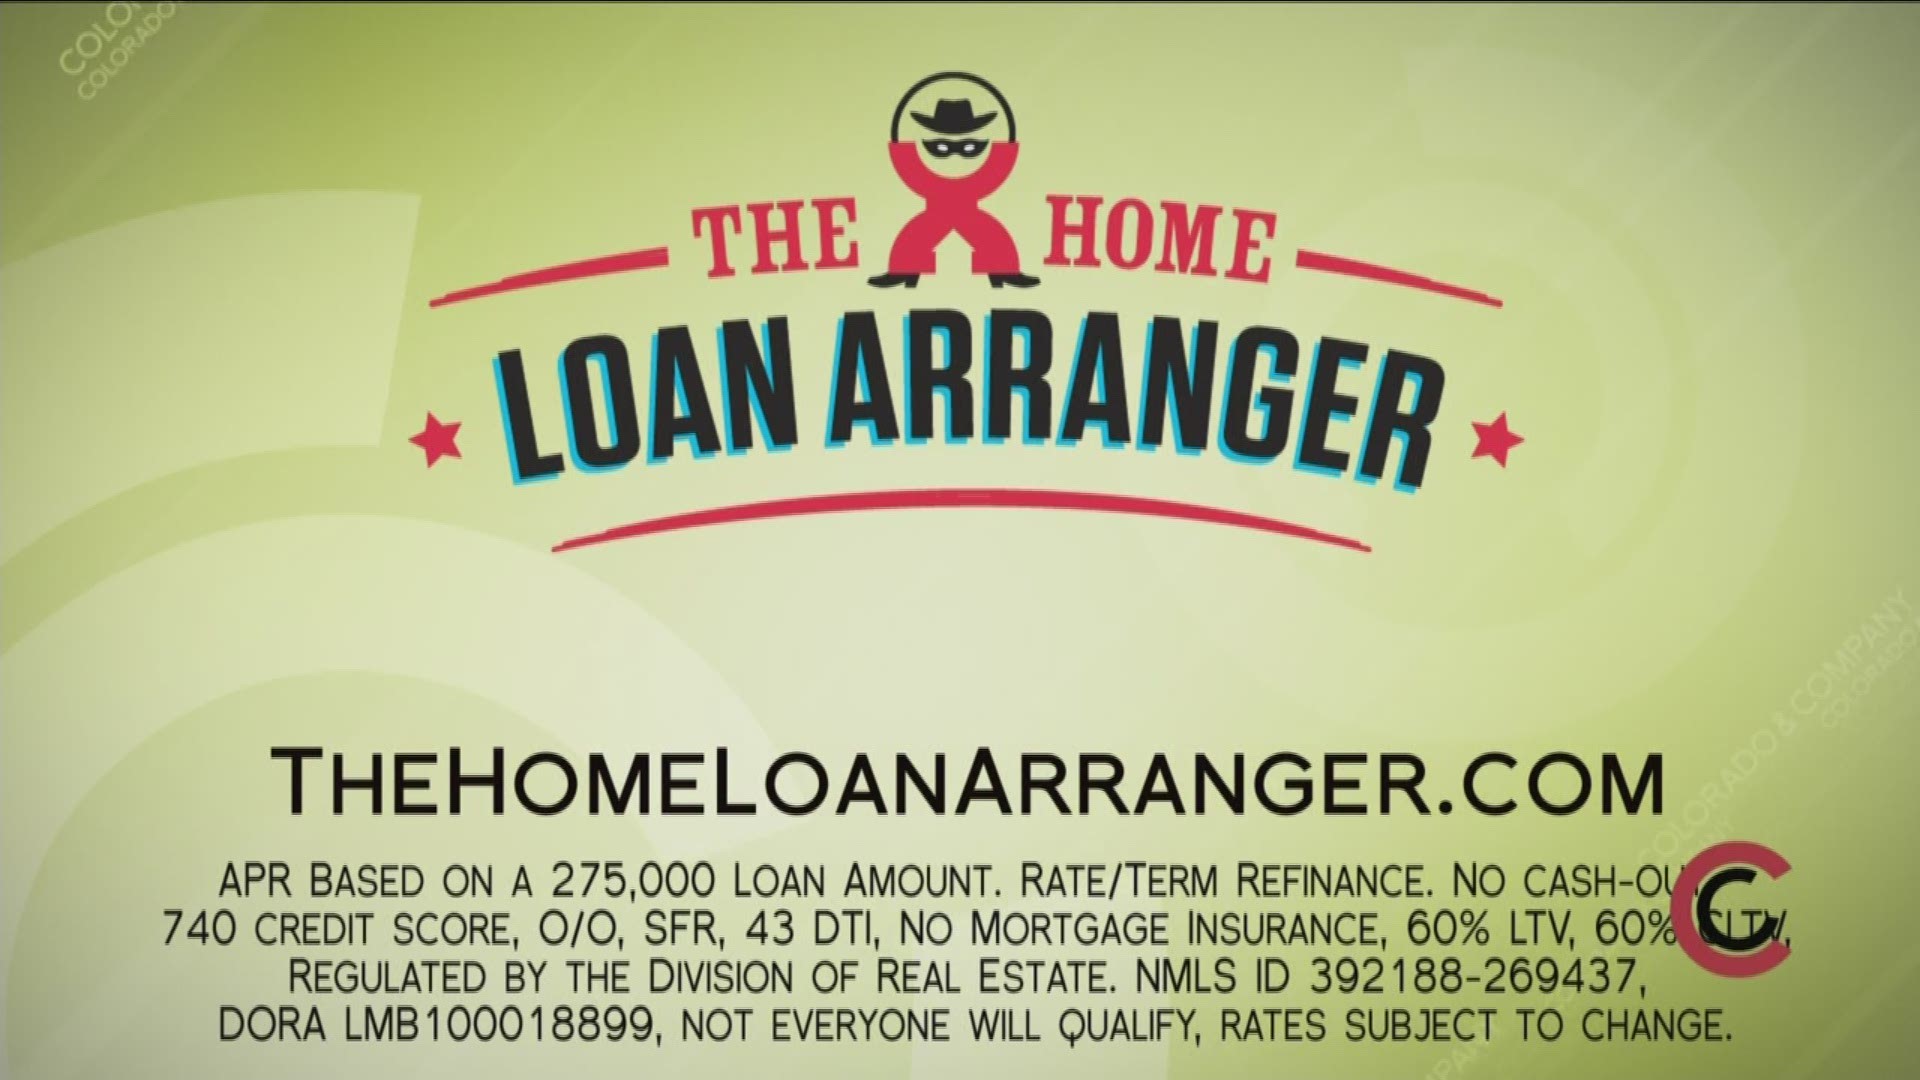 Call the Home Loan Arranger at 303.862.4742 to get started on a new home loan. Your payment won't be due until May! Learn more at TheHomeLoanArranger.com.